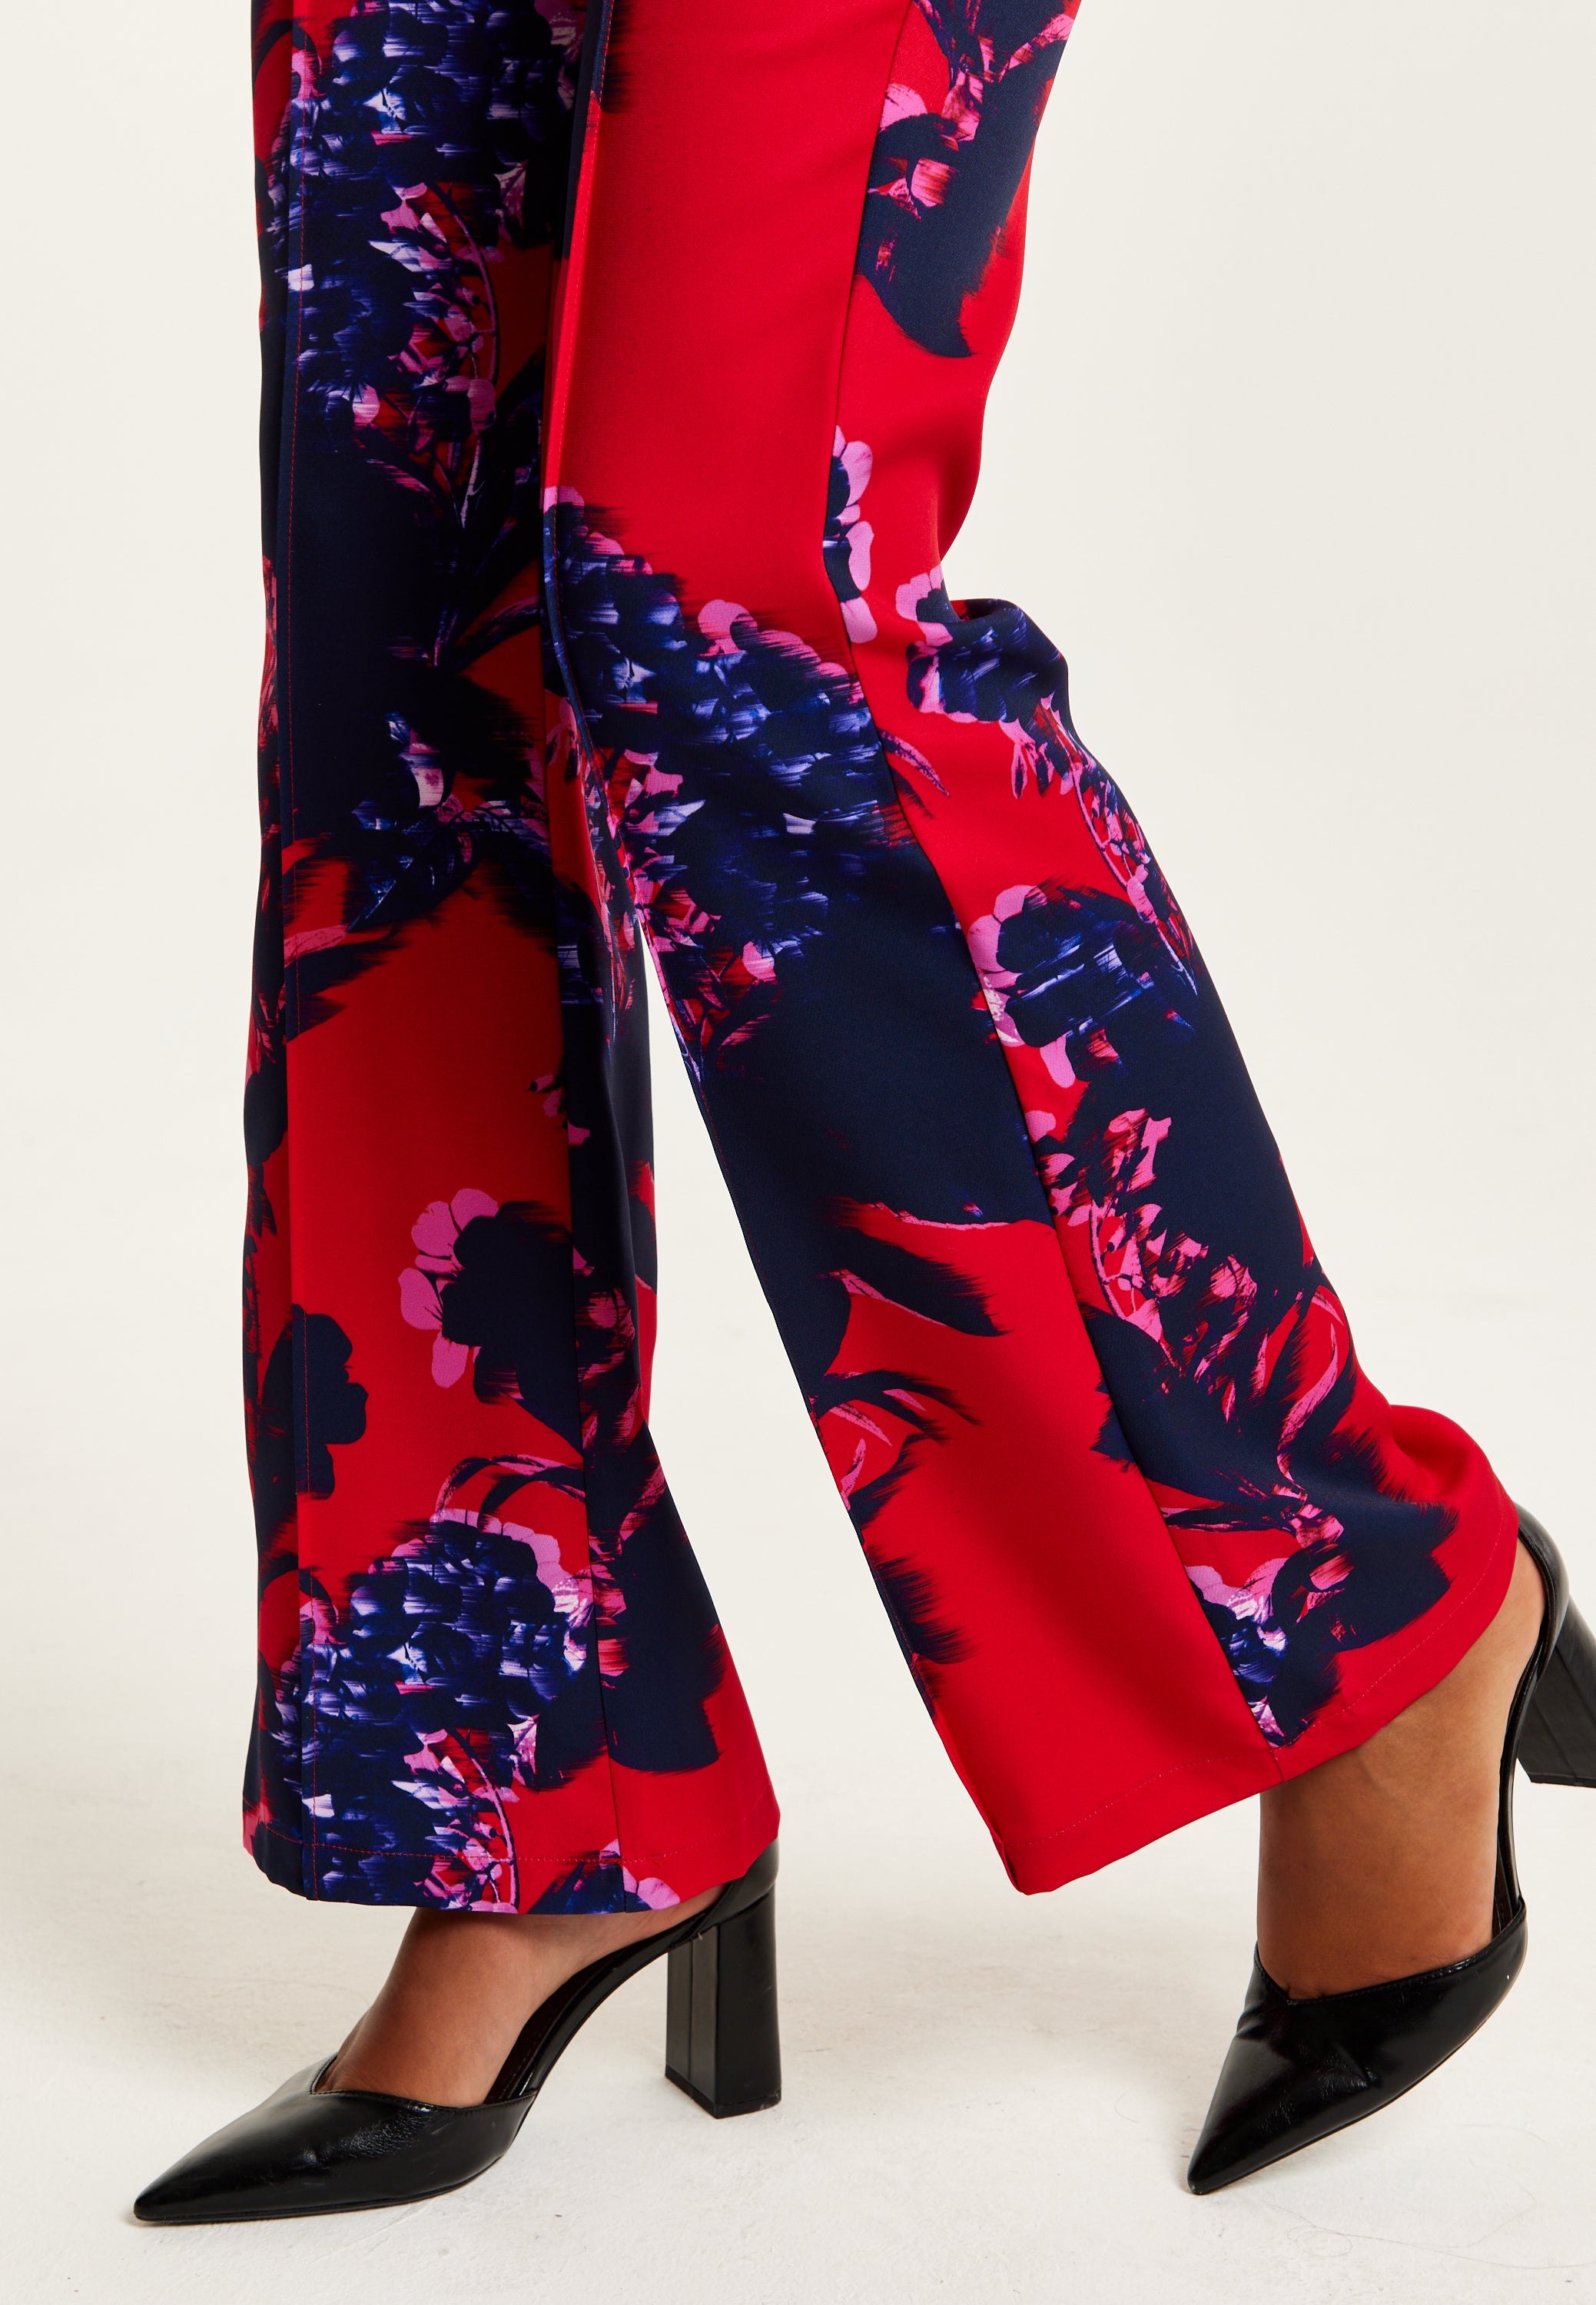 Tailored pants curvy | Red pants outfit, Red trousers outfit classy, Colour  blocking fashion